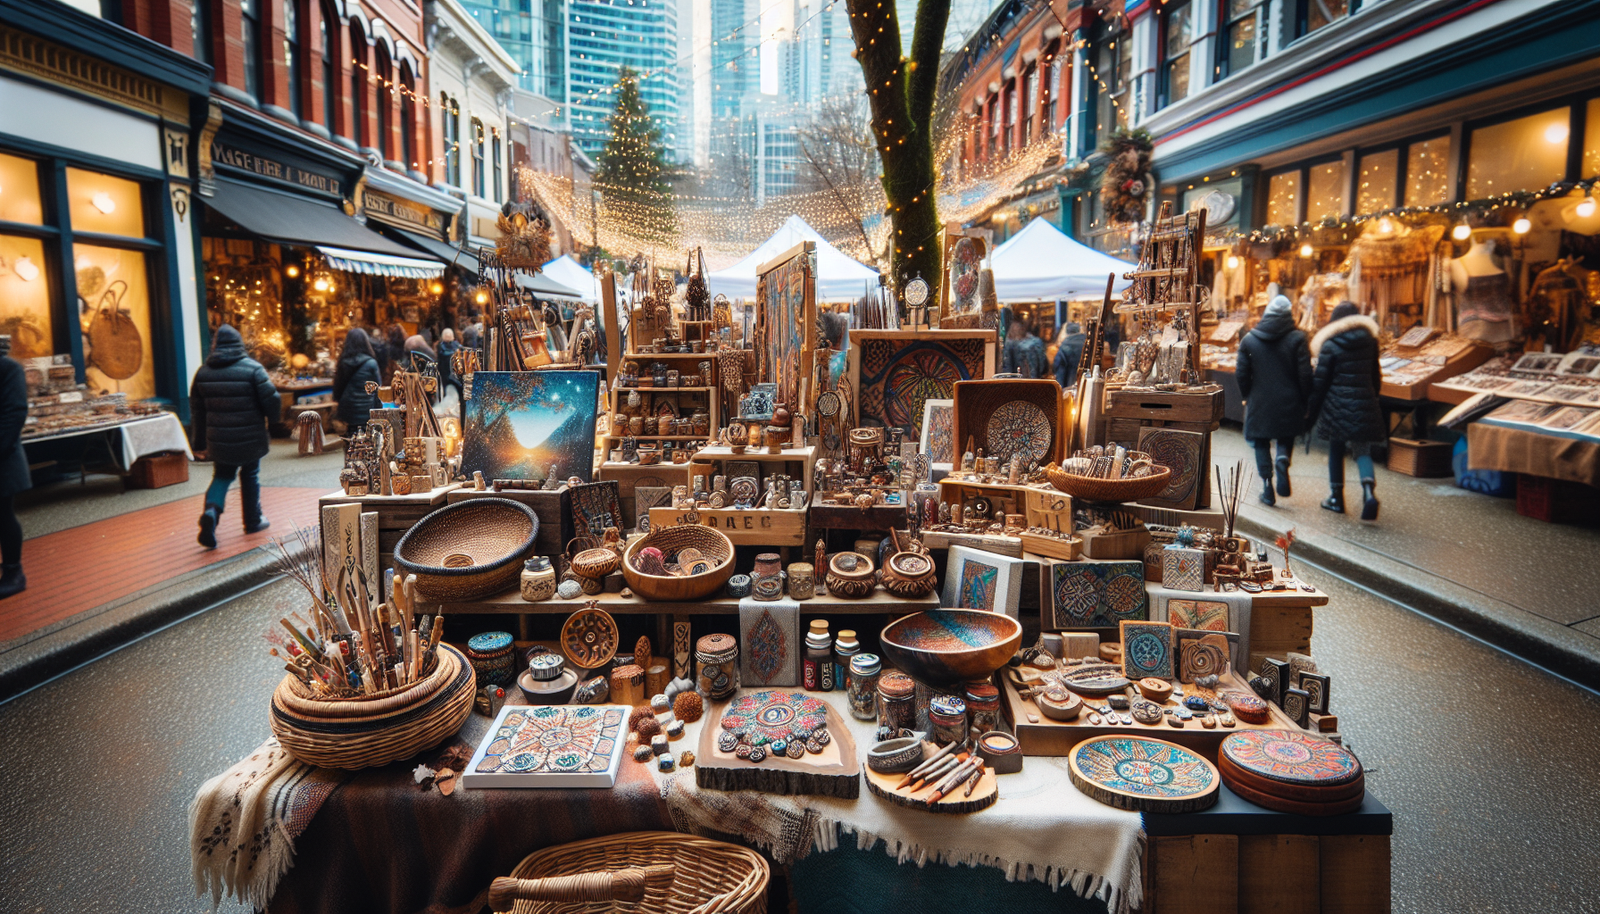 West End Wonders: Craft Fairs and Unique Gifts with diverse handmade items and artisanal products